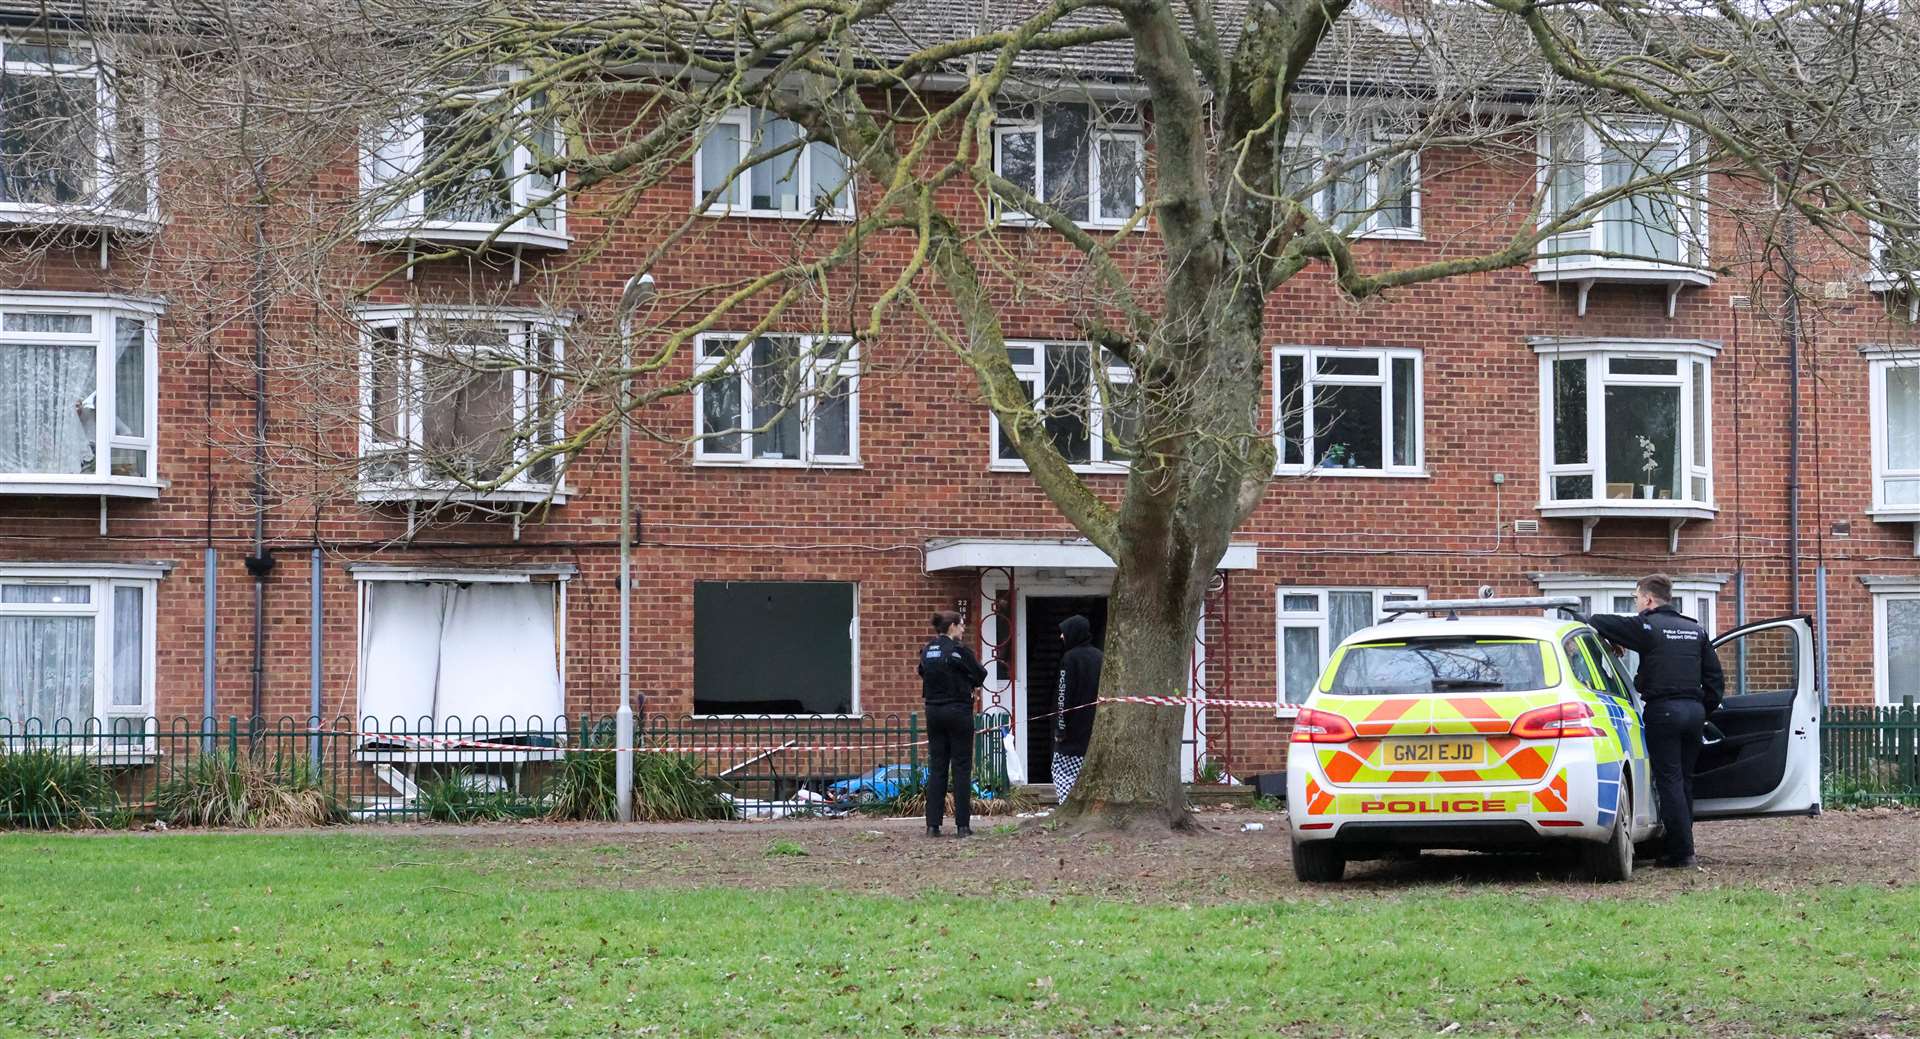 The police cordon outside the flat in Catlyn Close, East Malling. Photo: UKNIP